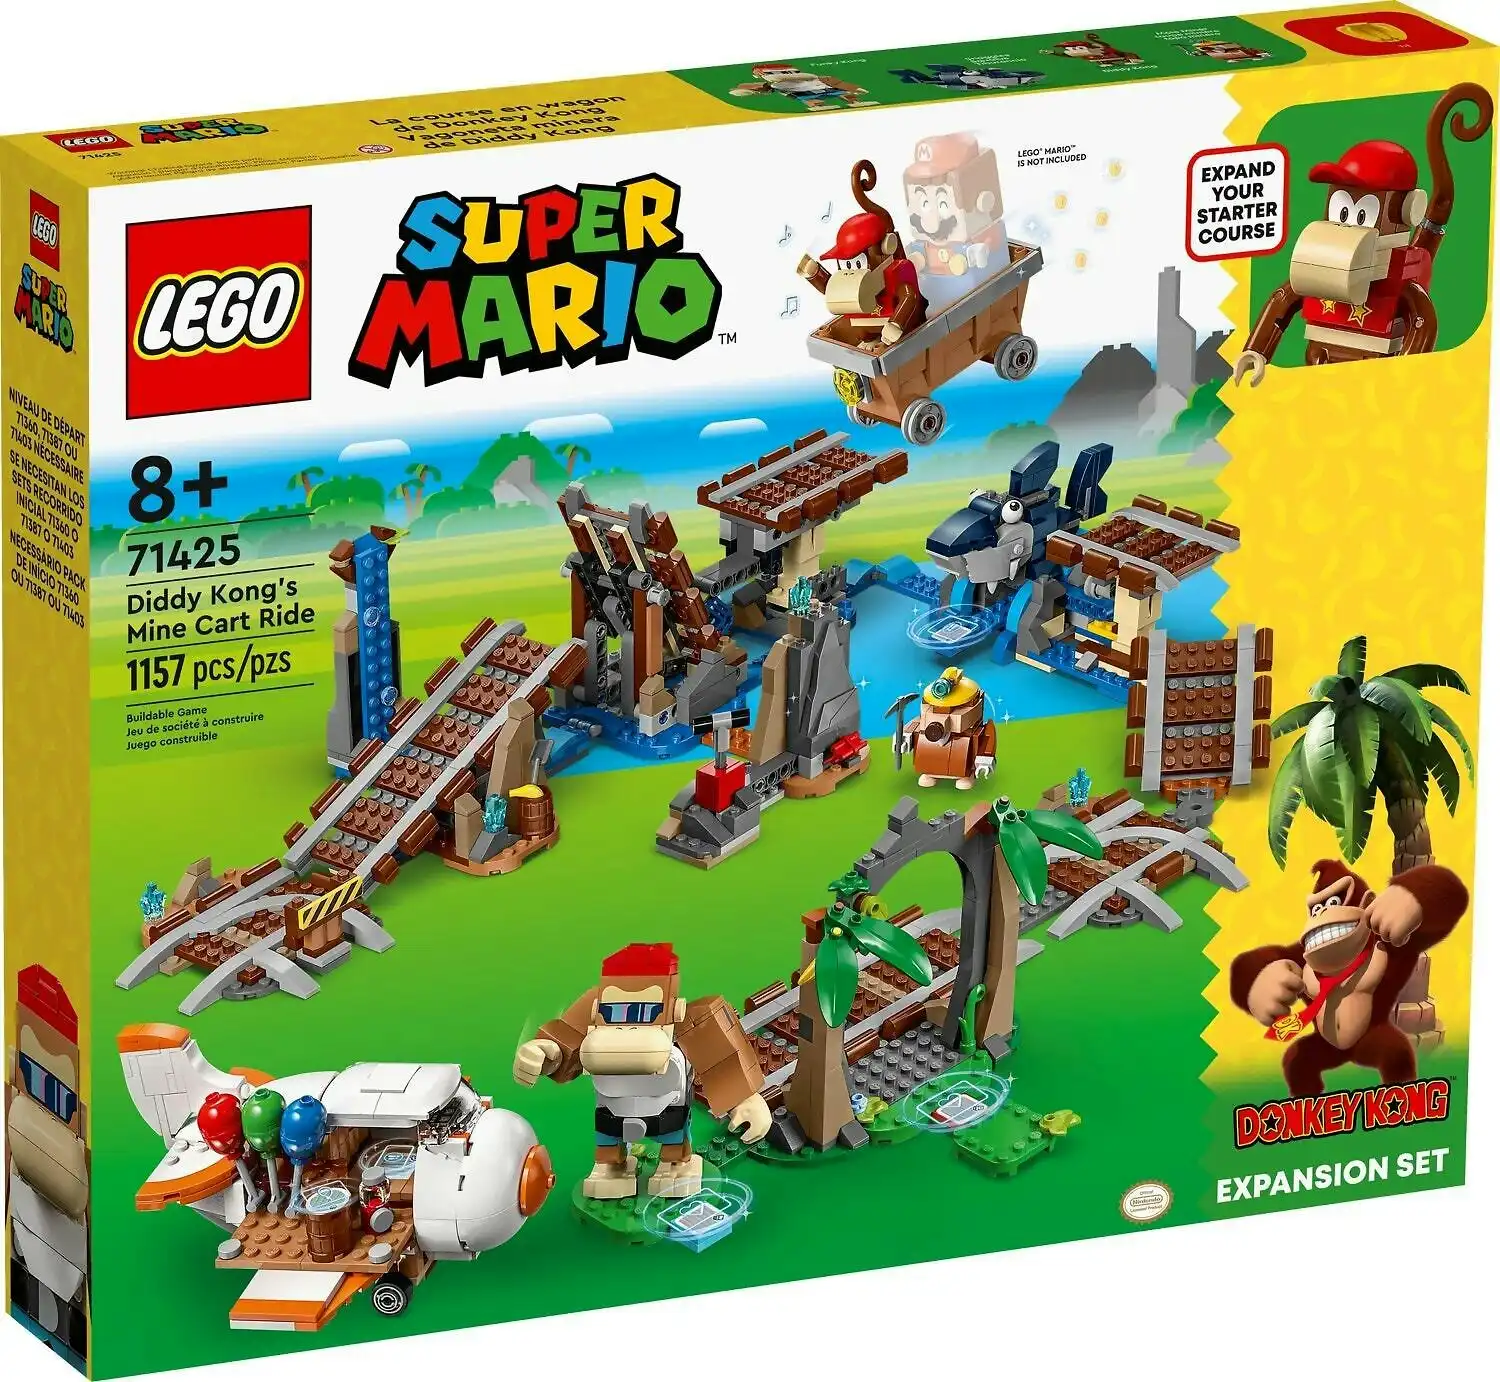 LEGO 71425 Diddy Kong's Mine Cart Ride Expansion Set - Super Mario